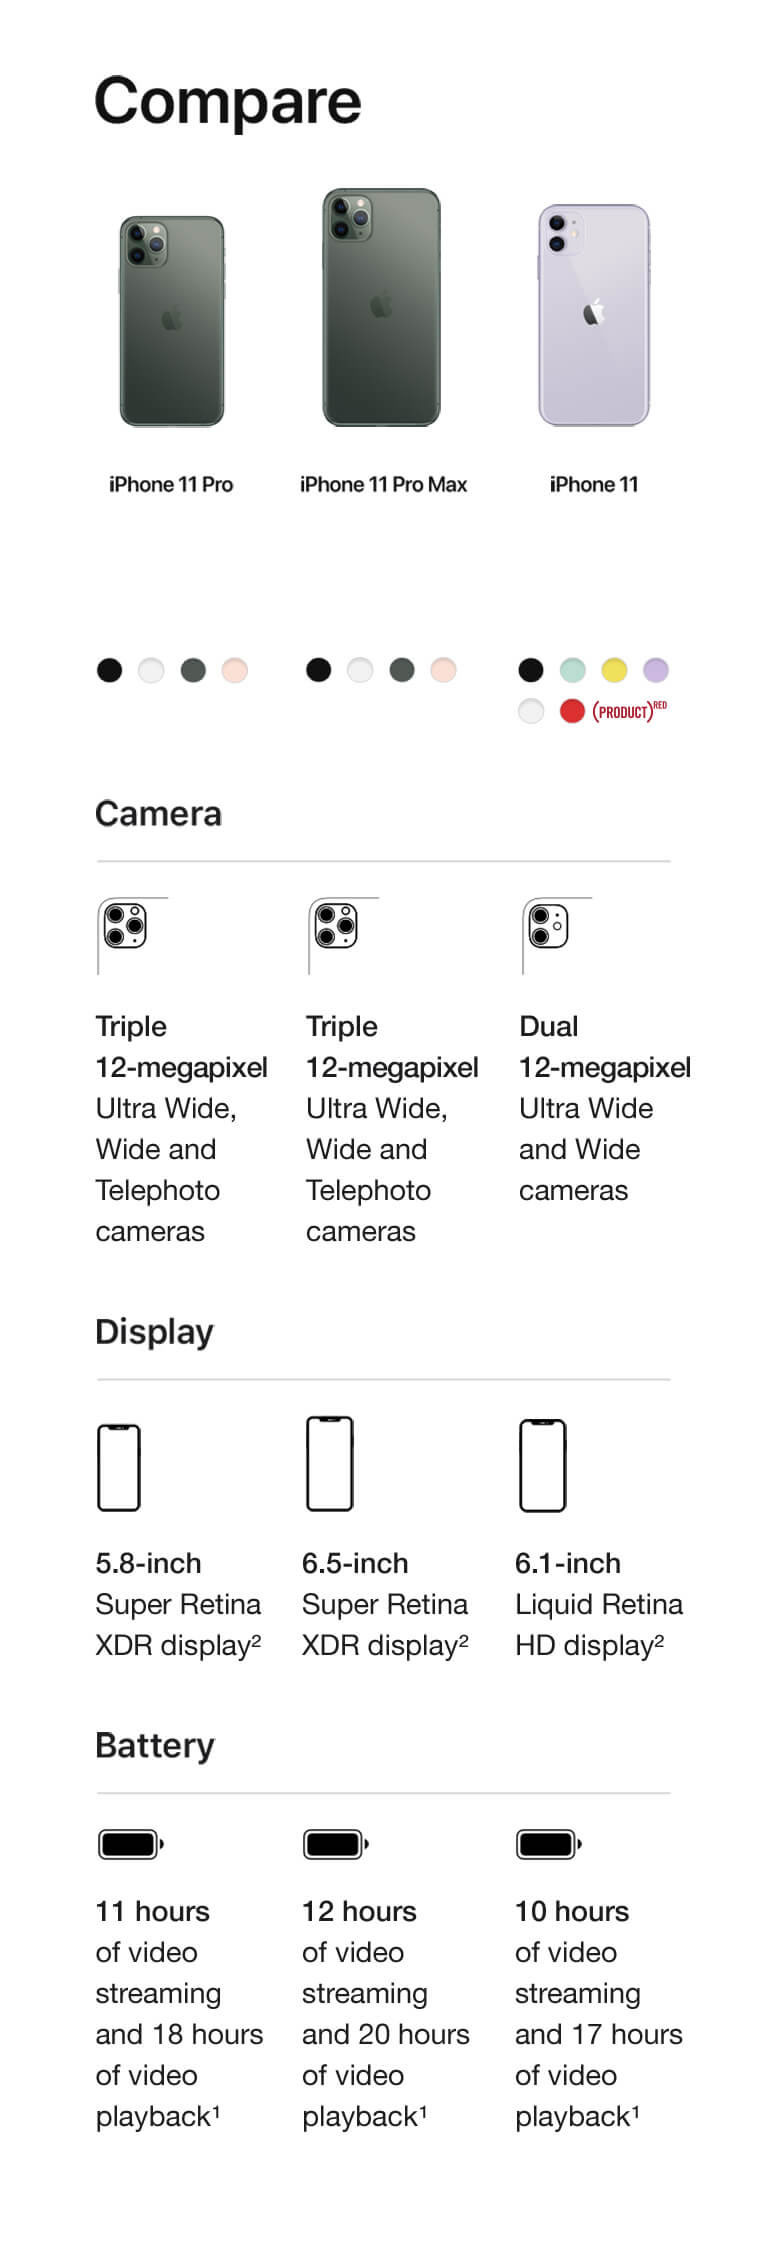 Compare iPhones. Compare cameras. iPhone 11 Pro. Triple 12-megapixel Ultra Wide, Wide and Telephoto cameras. iPhone 11 Pro Max. Triple 12-megapixel Ultra Wide, Wide and Telephoto cameras. iPhone 11. Dual 12-megapixel Ultra Wide and Wide cameras. Compare displays. iPhone 11 Pro. 5.8-inch Super Retina XDR display. iPhone 11 Pro Max. 6.5-inch Super Retina XDR display. iPhone 11. 6.1-inch Liquid Retina HD display. Compare Batteries. iPhone 11 Pro. 11 hours of video streaming and 18 hours of video playback. iPhone 11 Pro Max. 12 hours of video streaming and 20 hours of video playback. iPhone 11. 10 hours of video streaming and 17 hours of video playback.